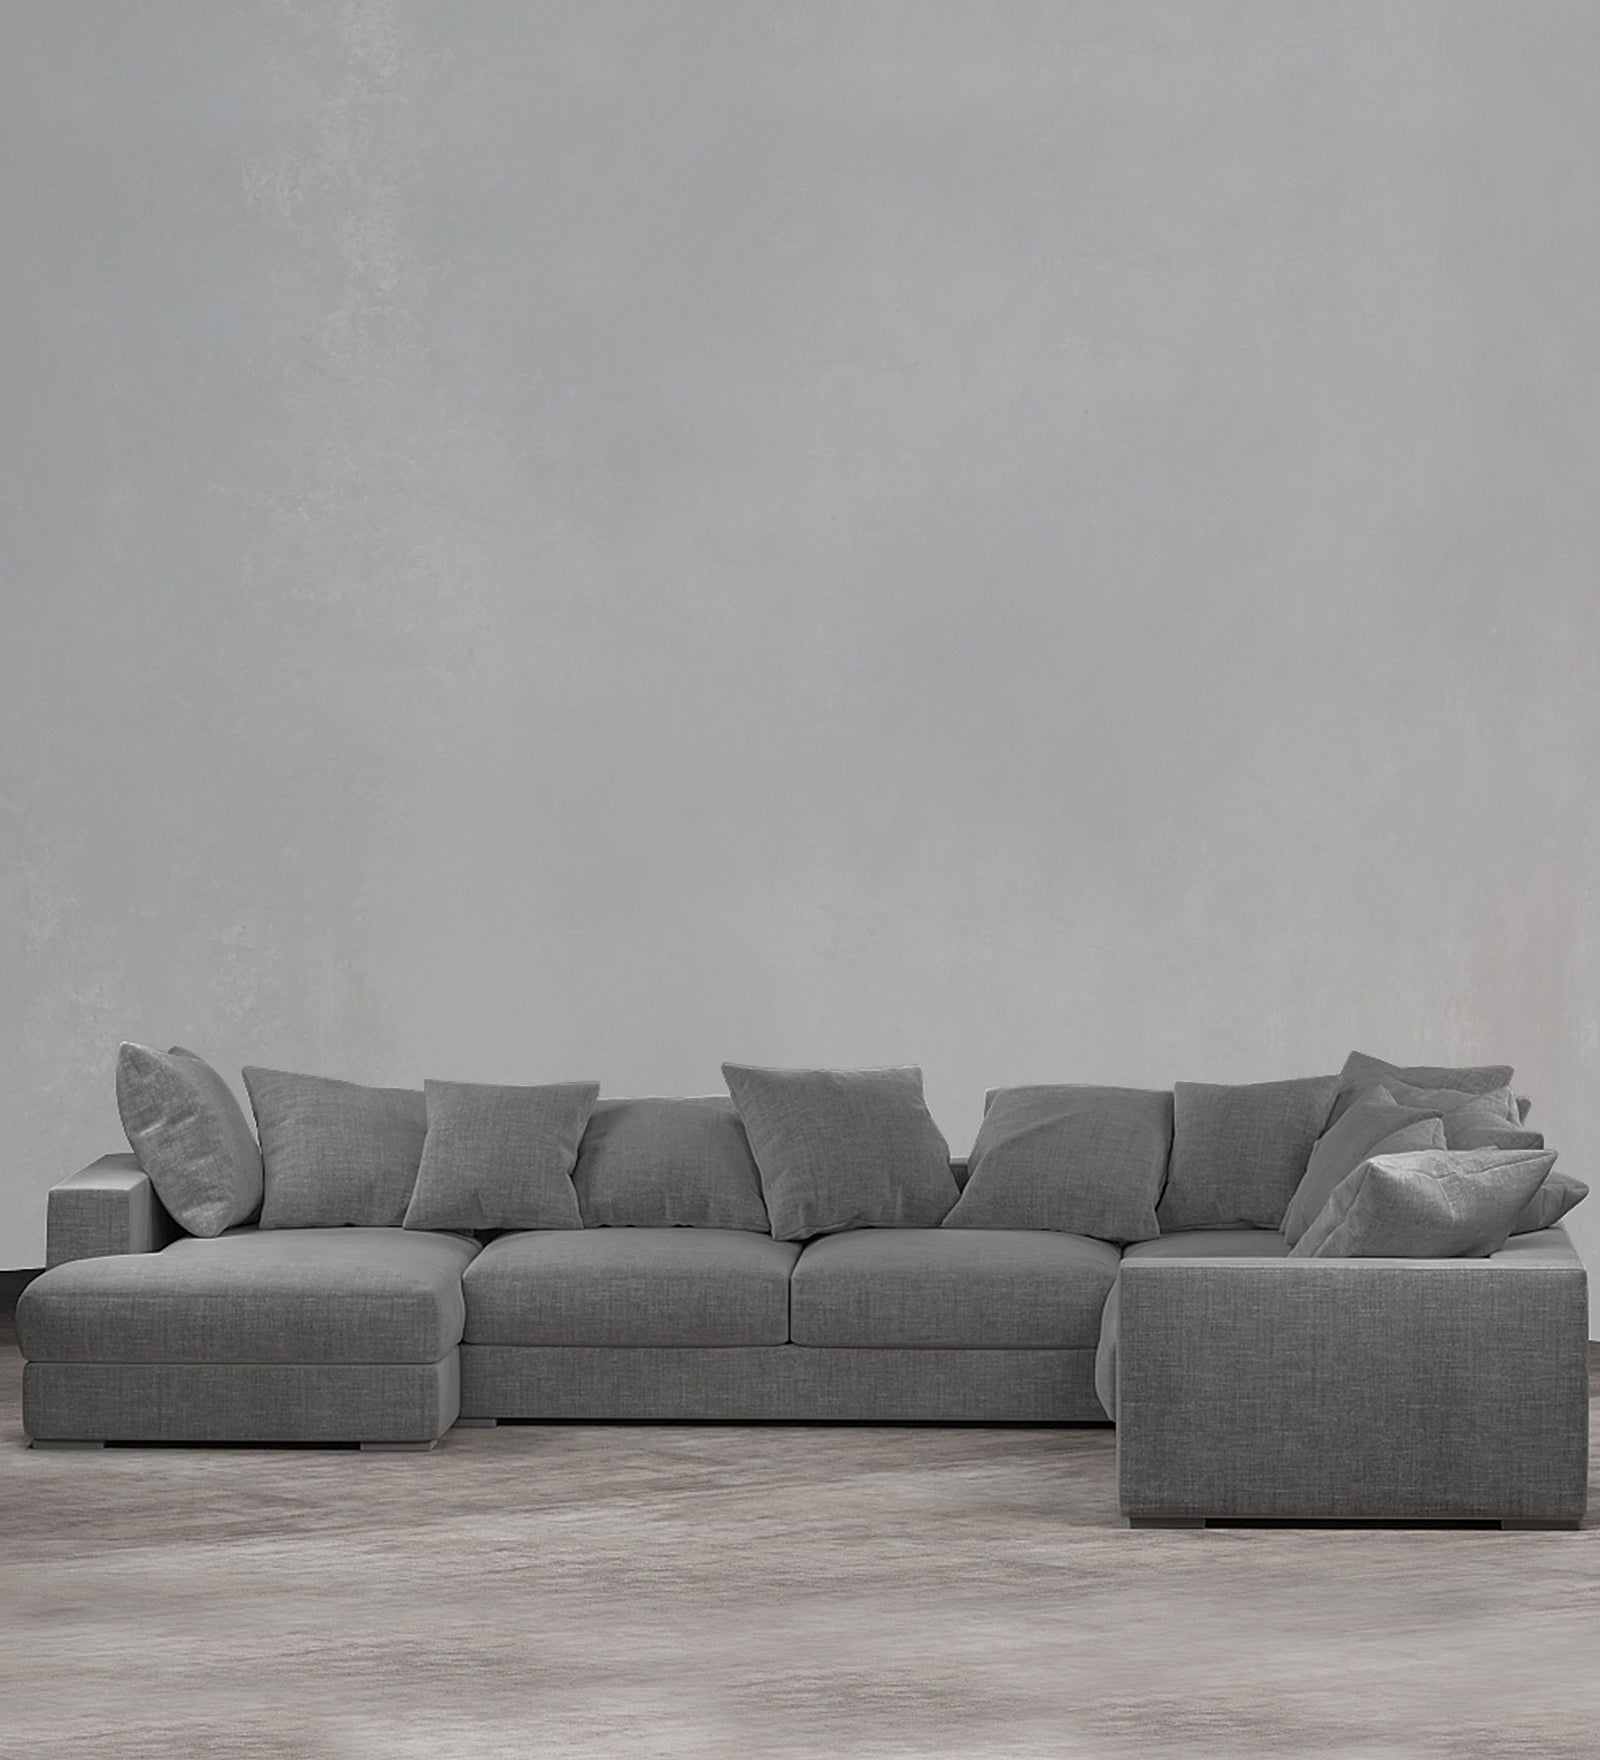 Striado Upholstered Sofa With Chaise Sectional in Beige